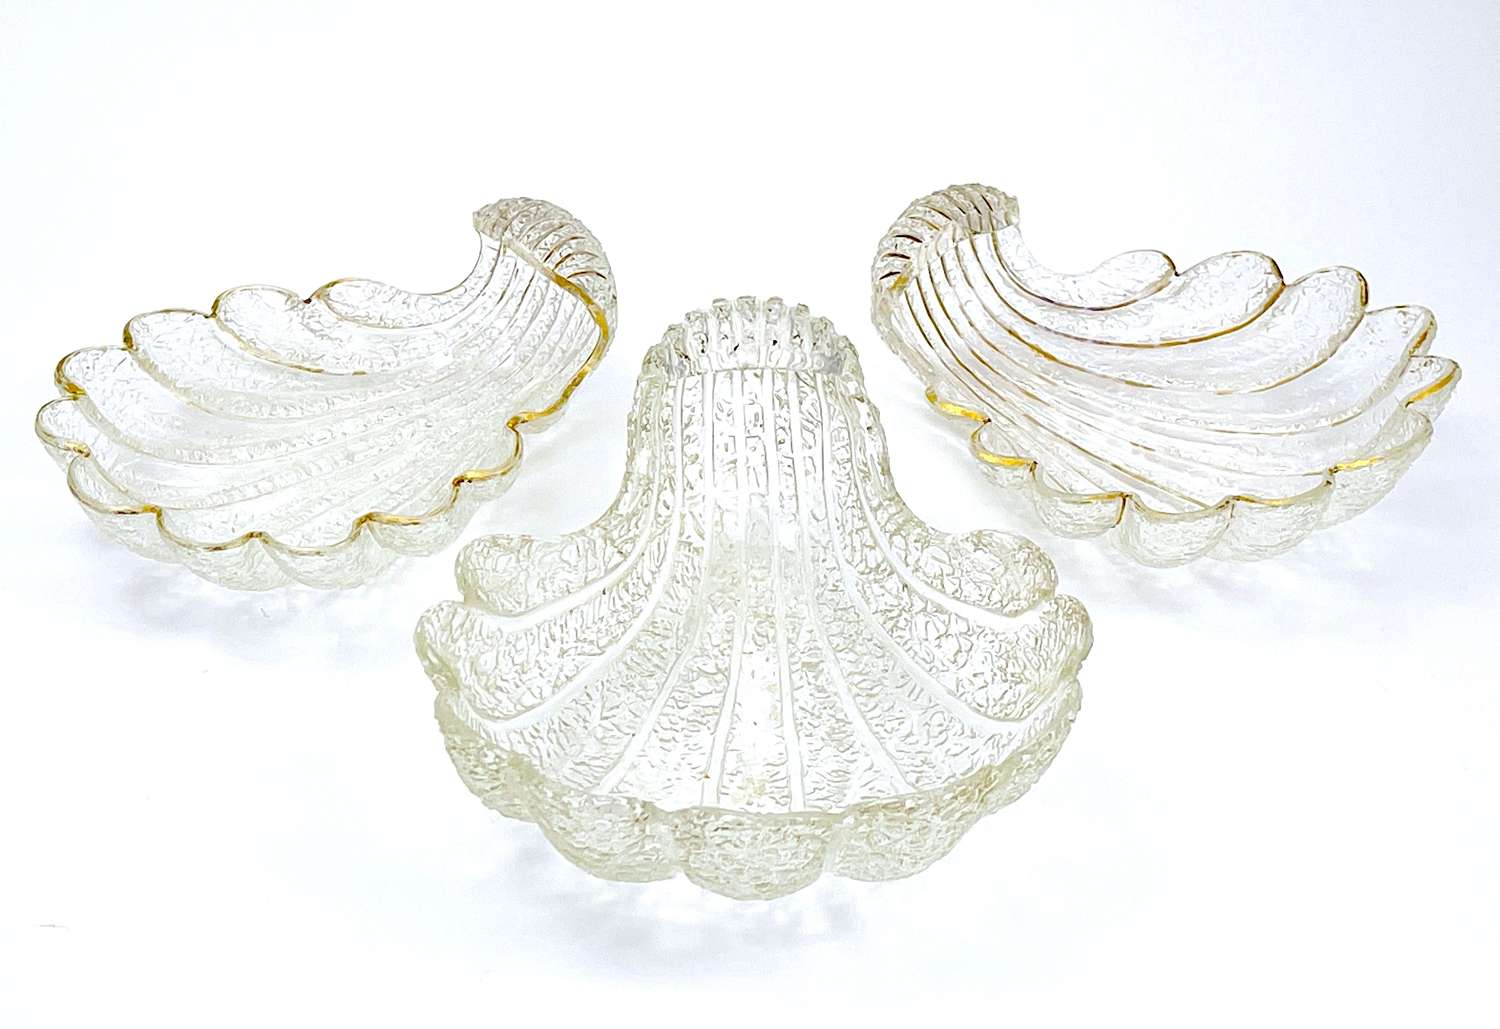 A Set of 3 Antique Cut Crystal Glass Shell Shaped Dishes